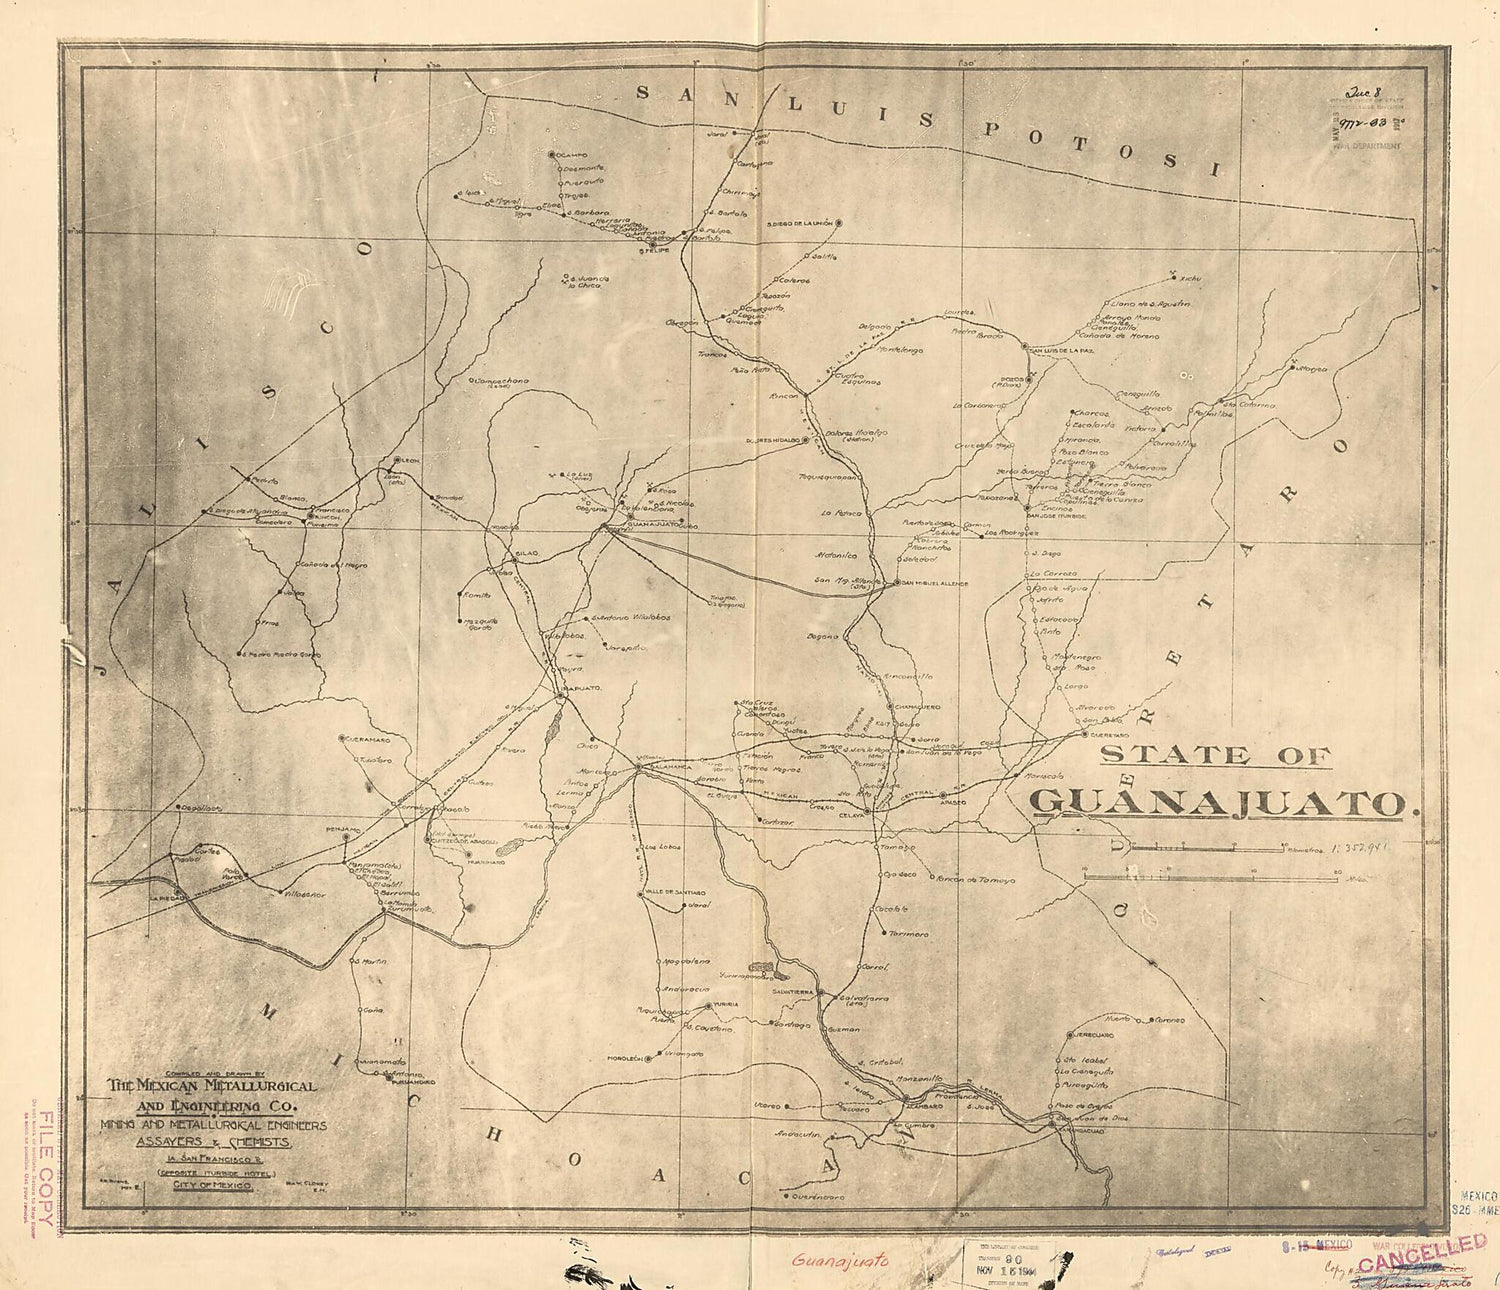 This old map of State of Guanajuato from 1910 was created by  Mexican Metallurgical and Engineering Co in 1910